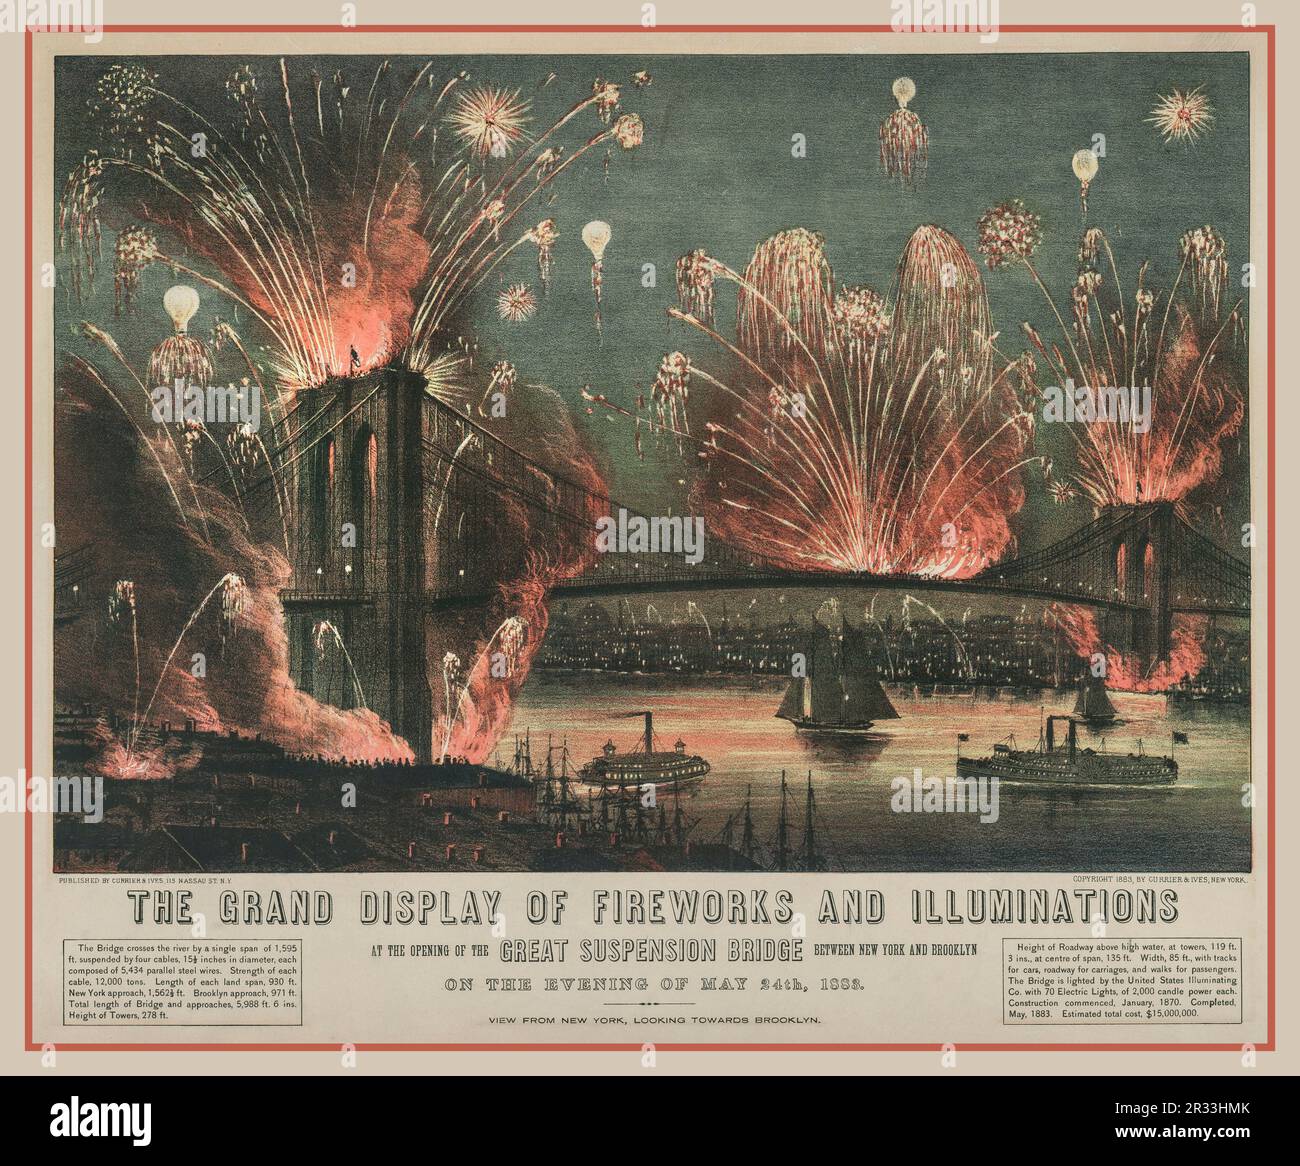 BROOKLYN BRIDGE VINTAGE OPENING CELEBRATIONS LITHOGRAPH POSTER 1880s The grand display of fireworks and illuminations: at the opening of the great suspension bridge between New York and Brooklyn on the evening of May 24th, 1883 Stock Photo